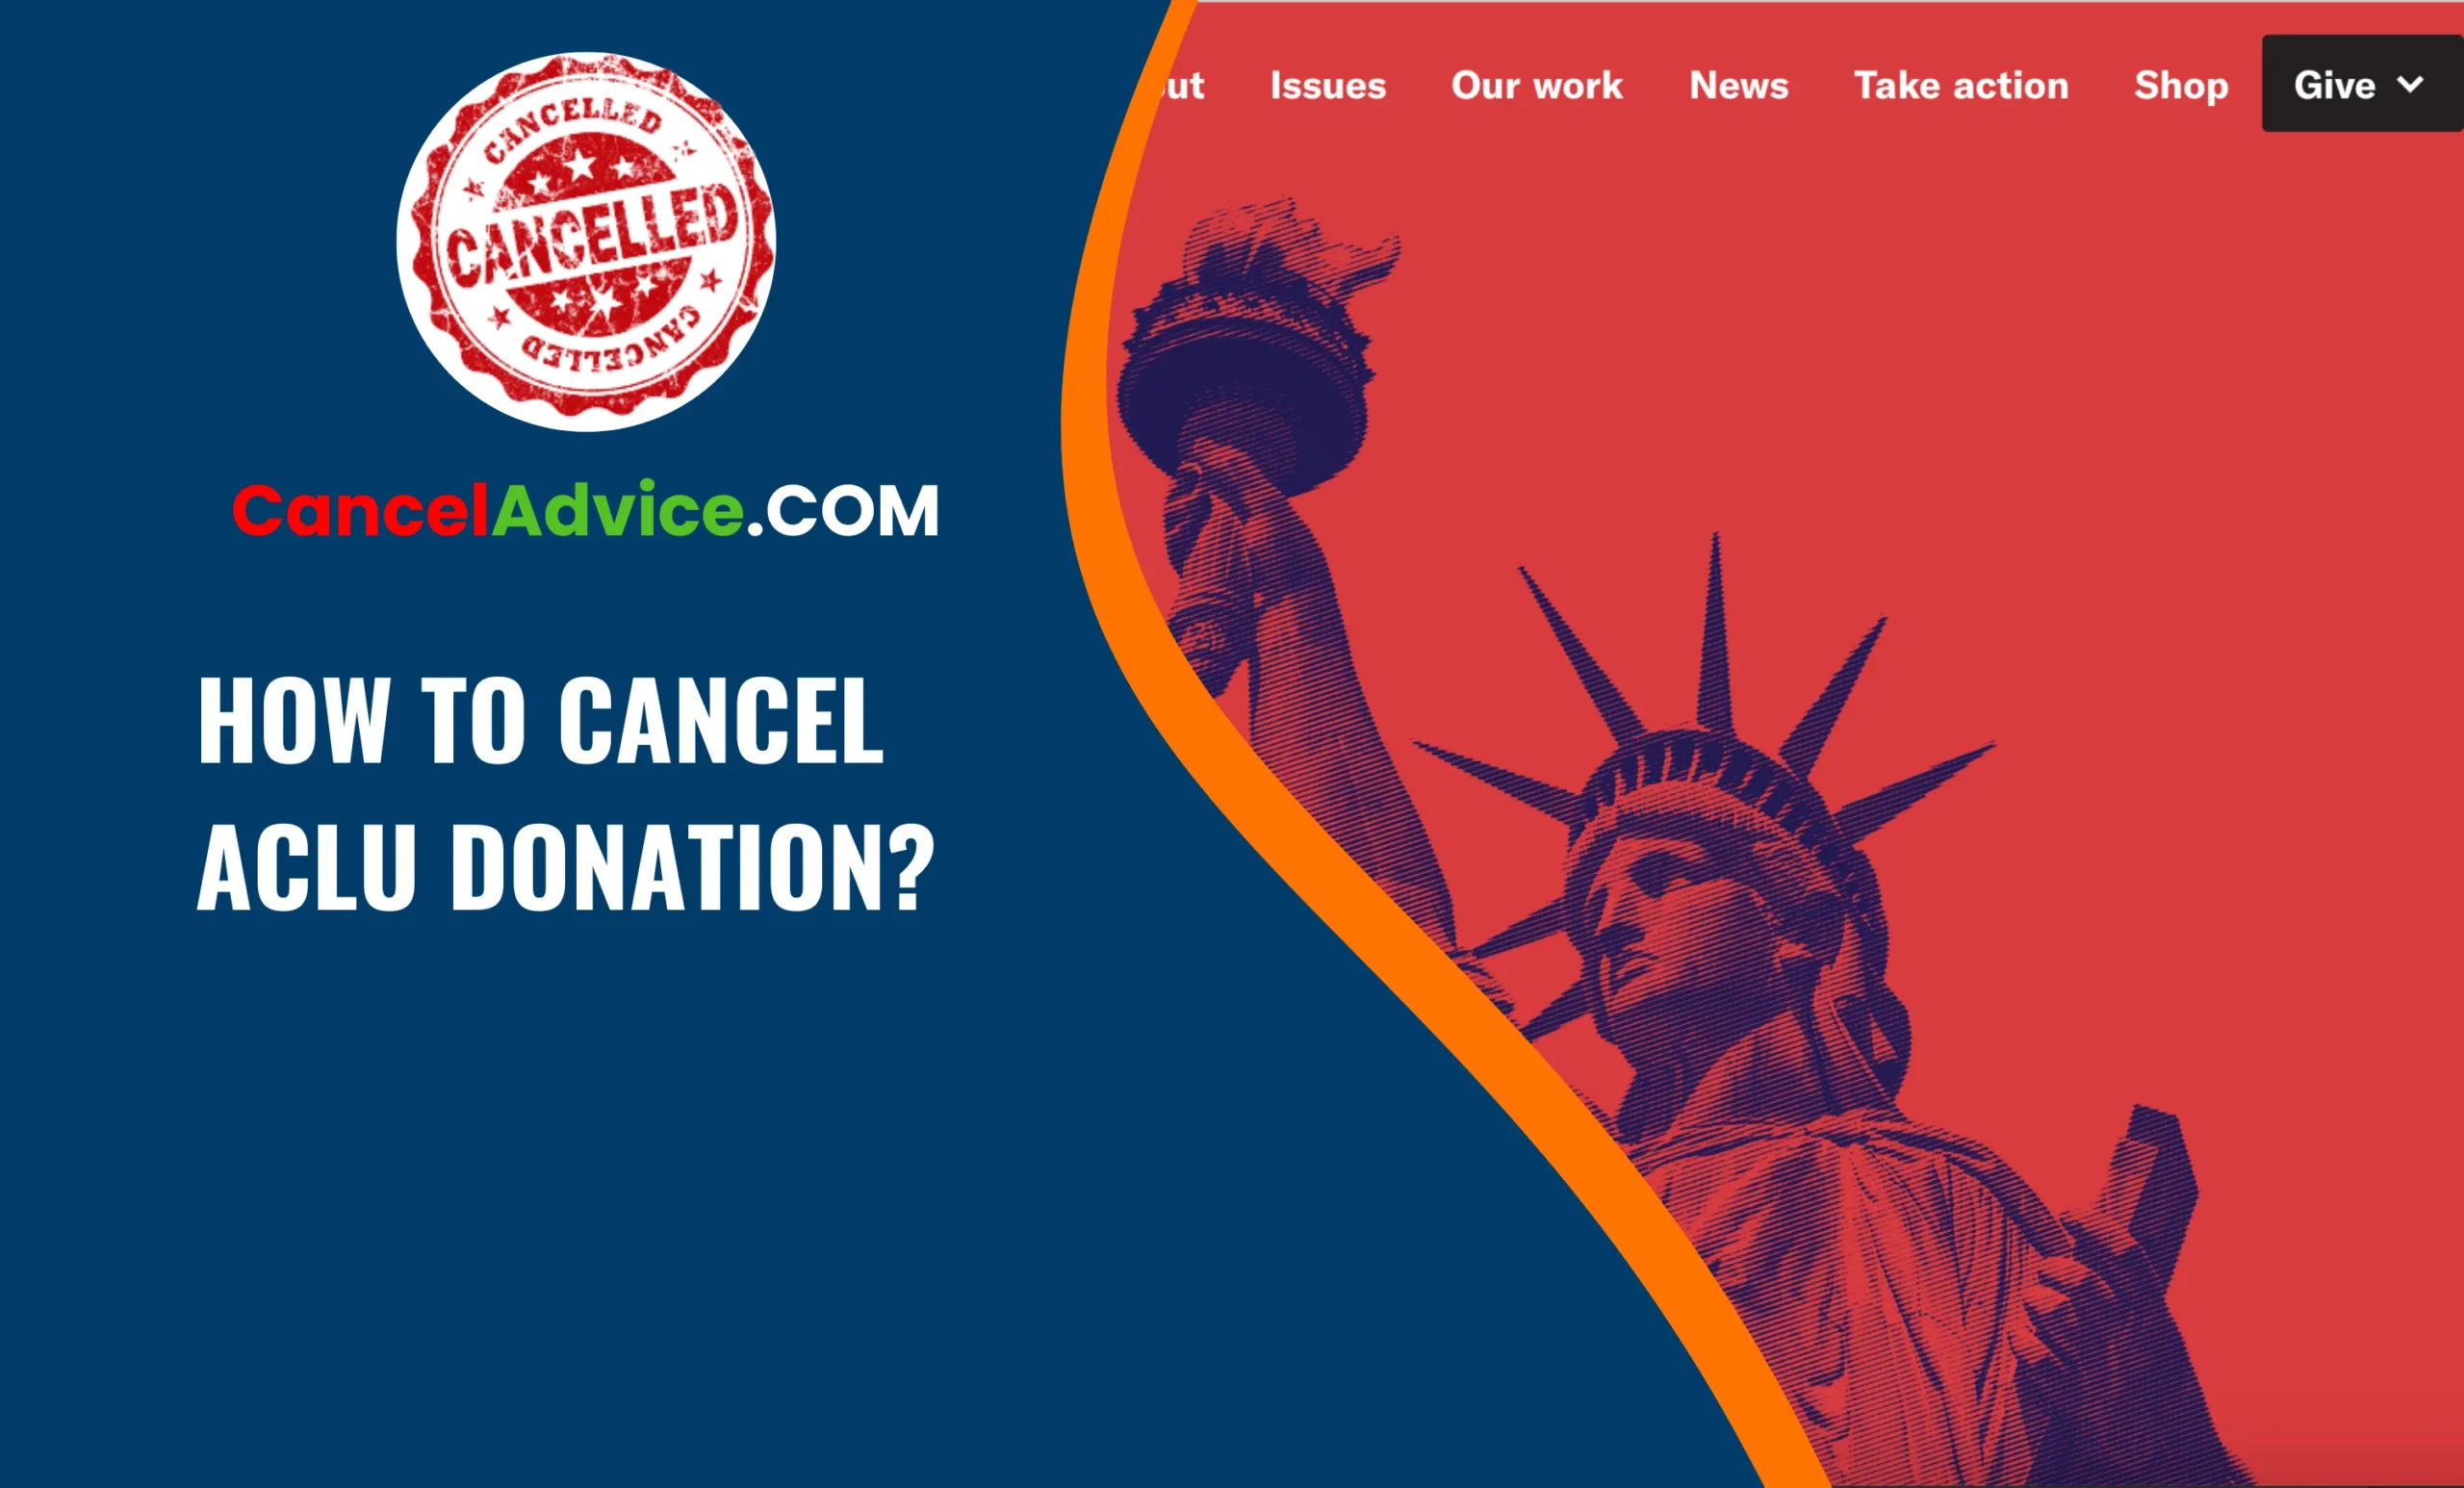 How To Cancel ACLU Donation